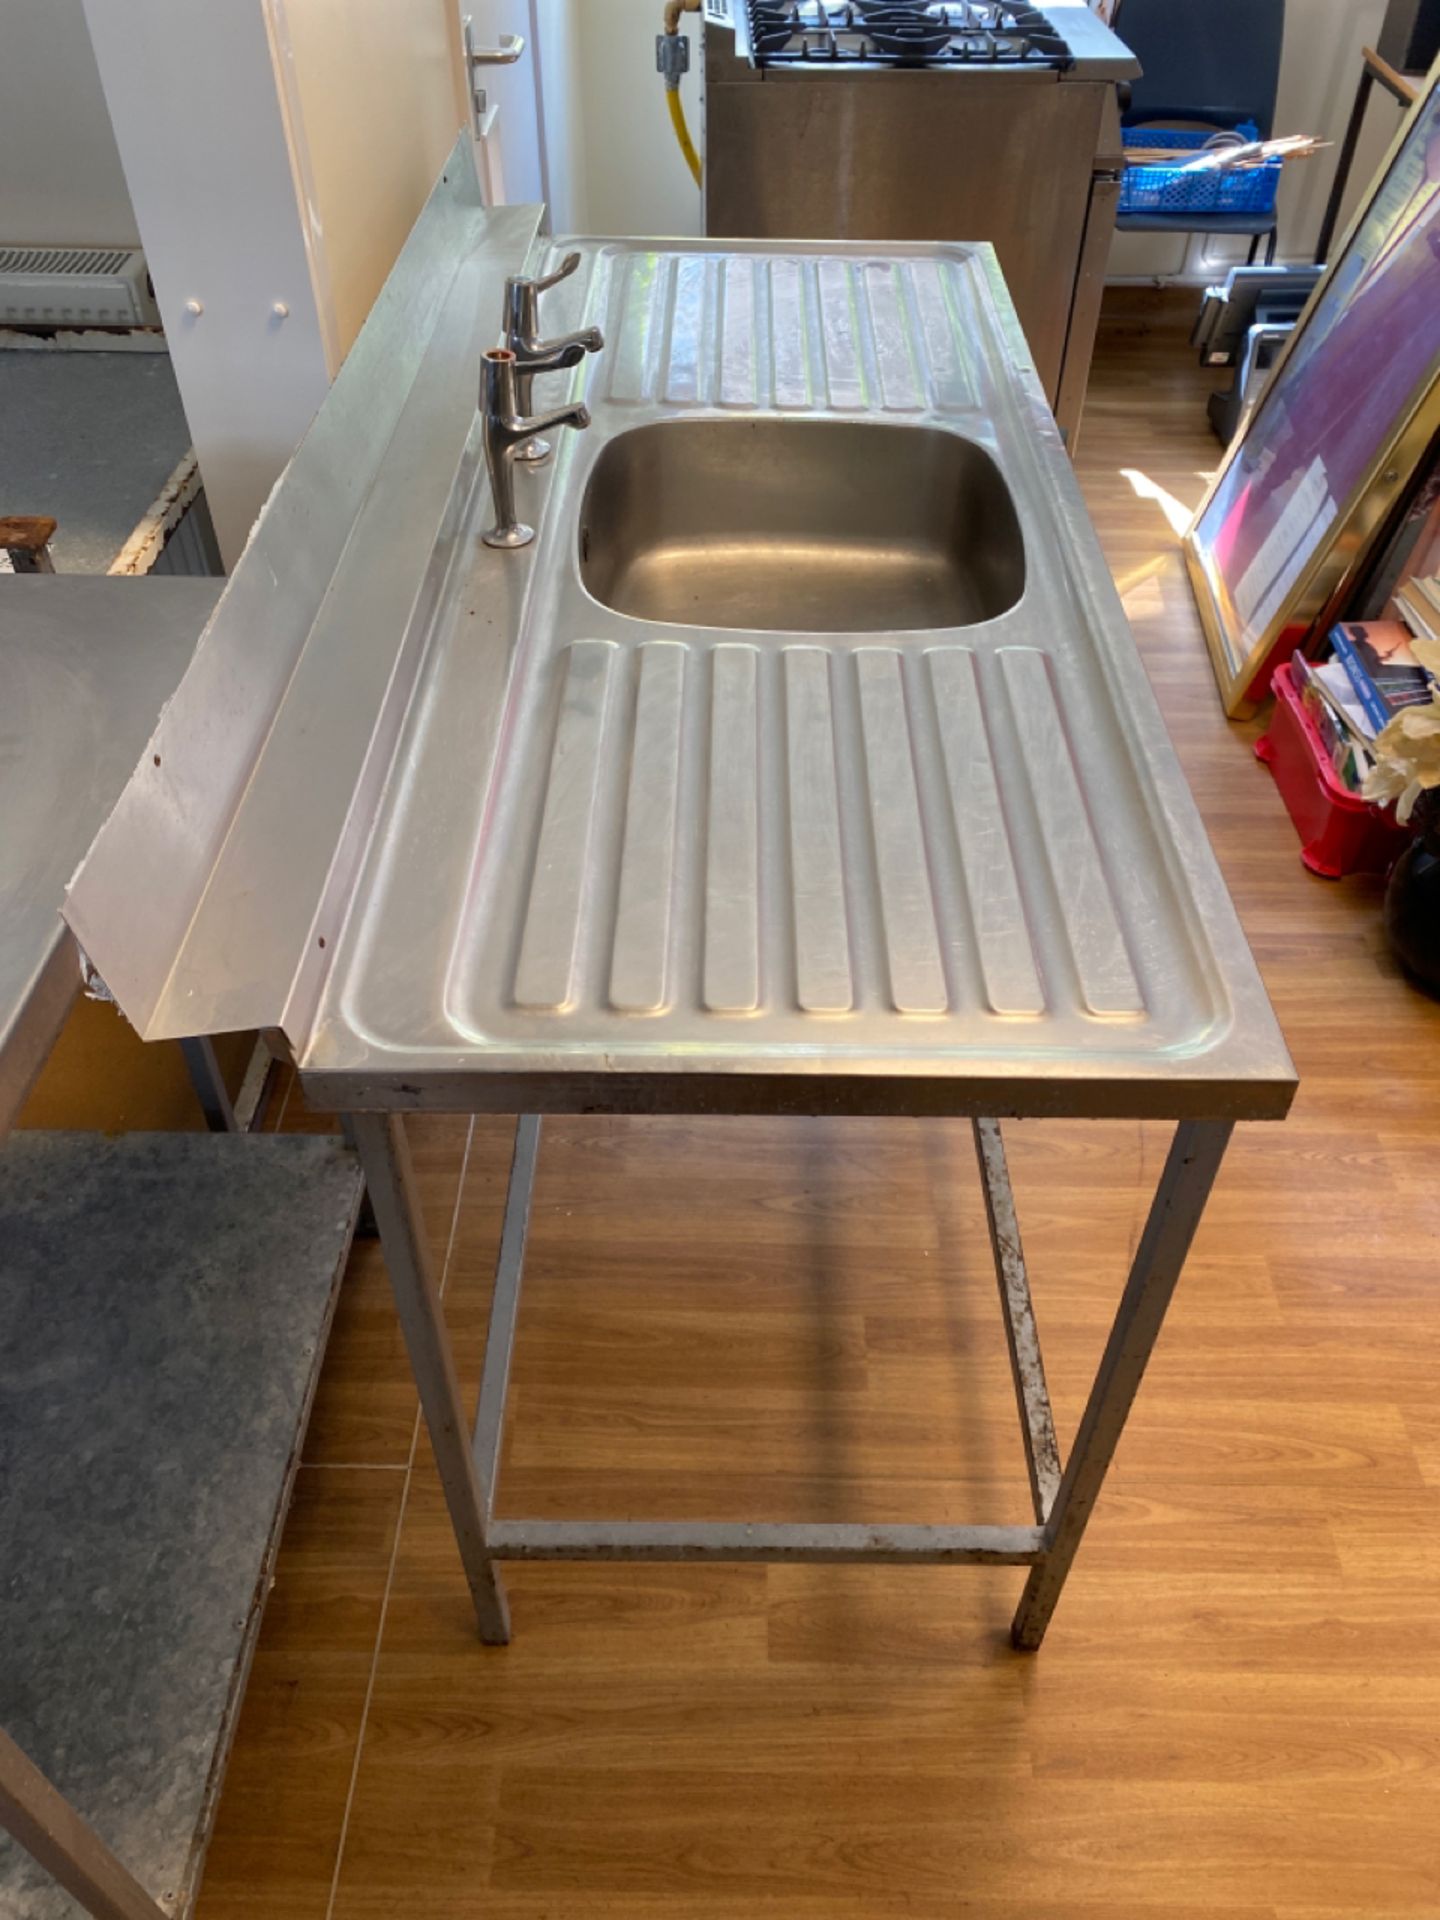 Stainless Steel Sink Unit - Image 5 of 10